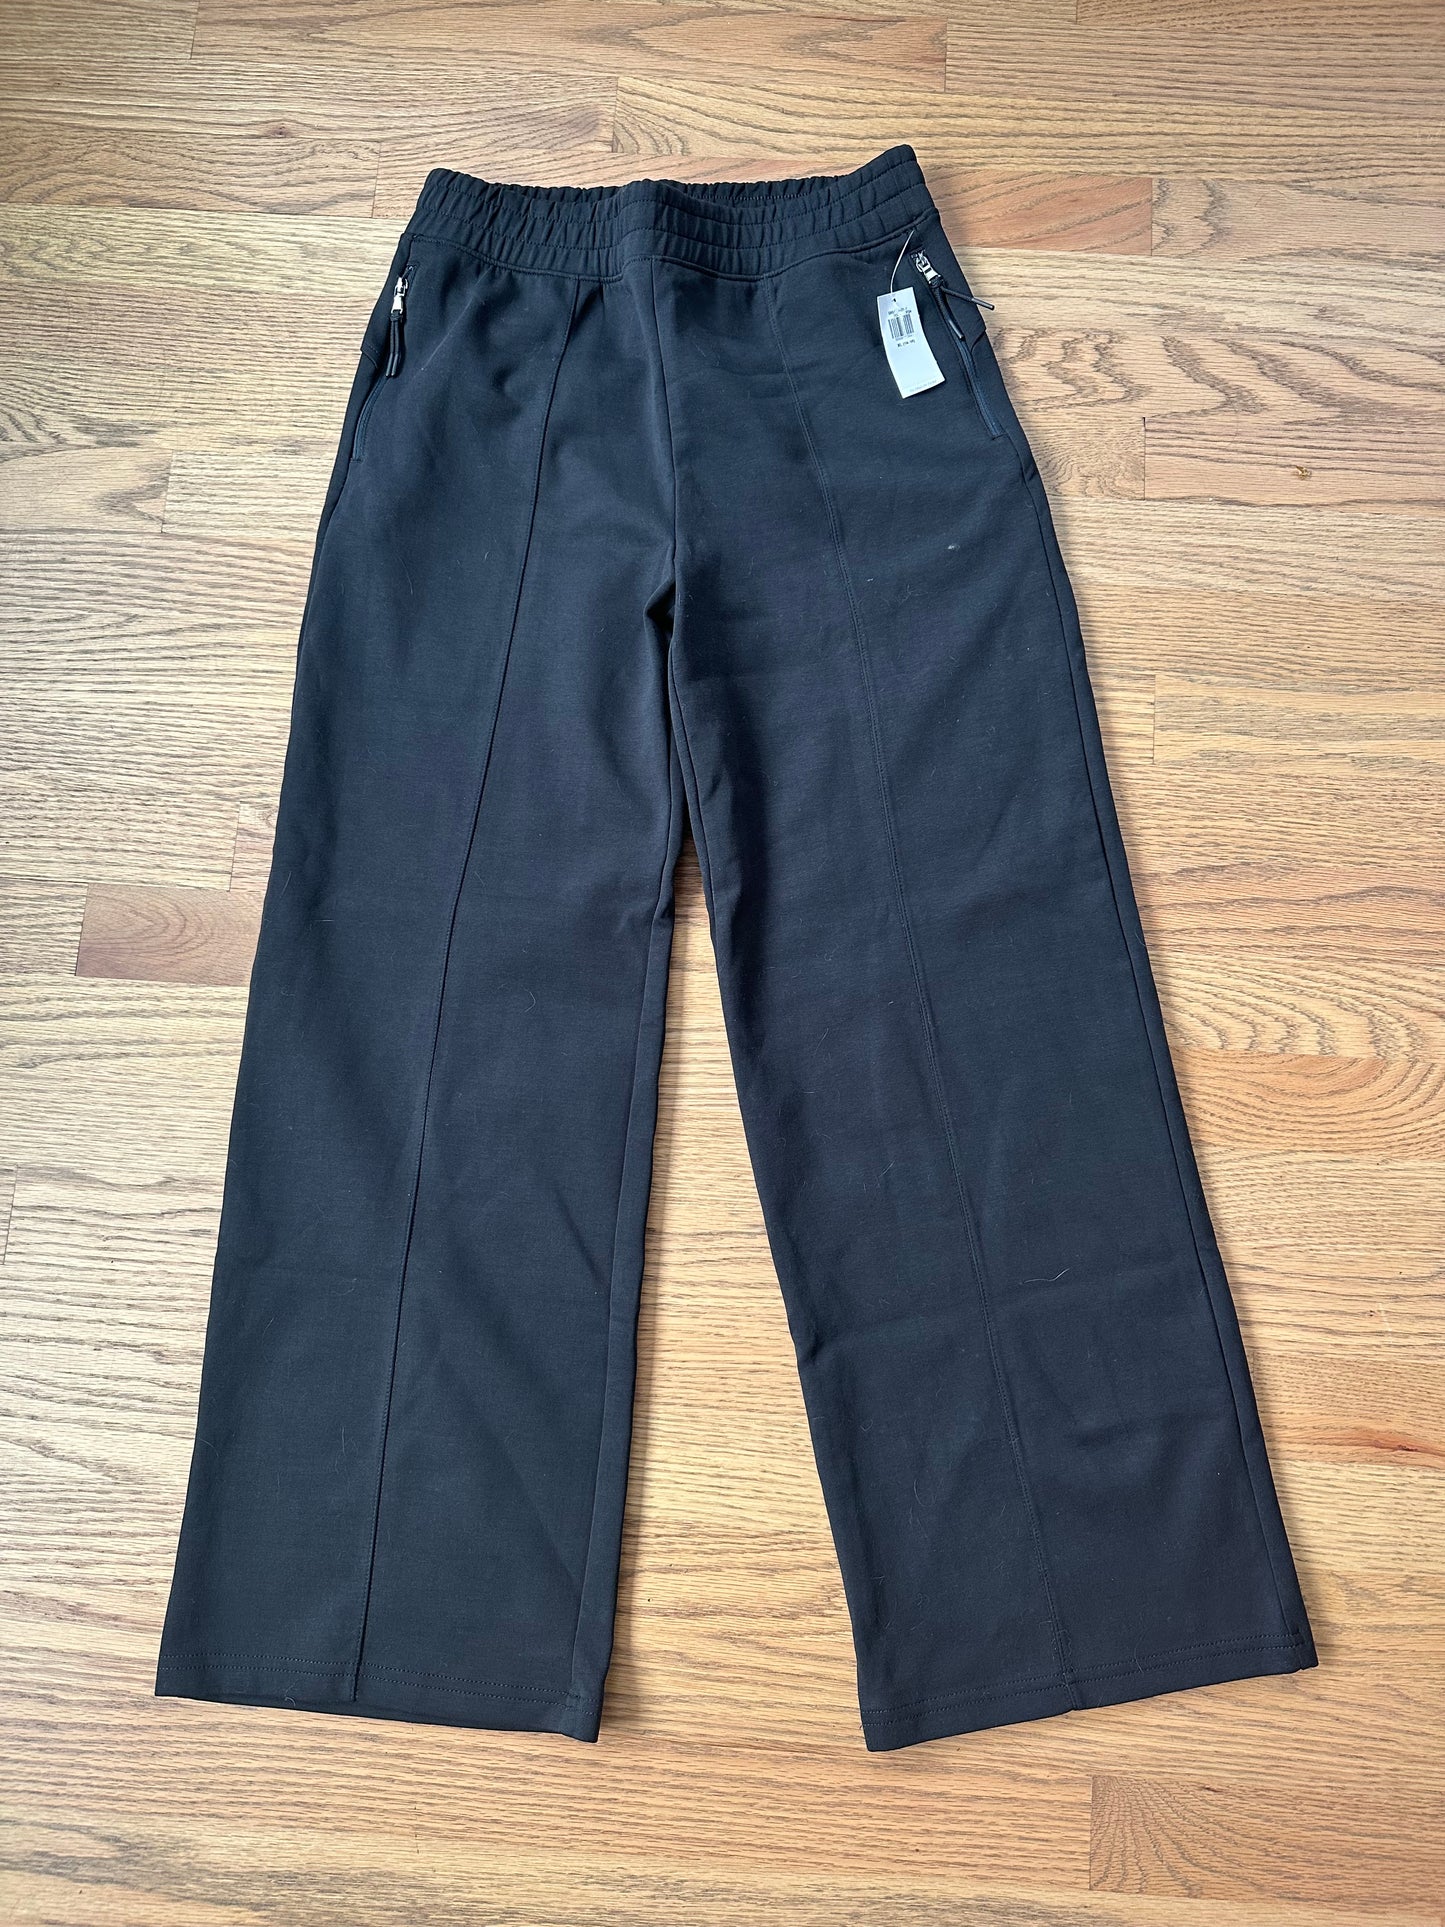 NWT Old Navy Girls Active Pants- Size 14/16